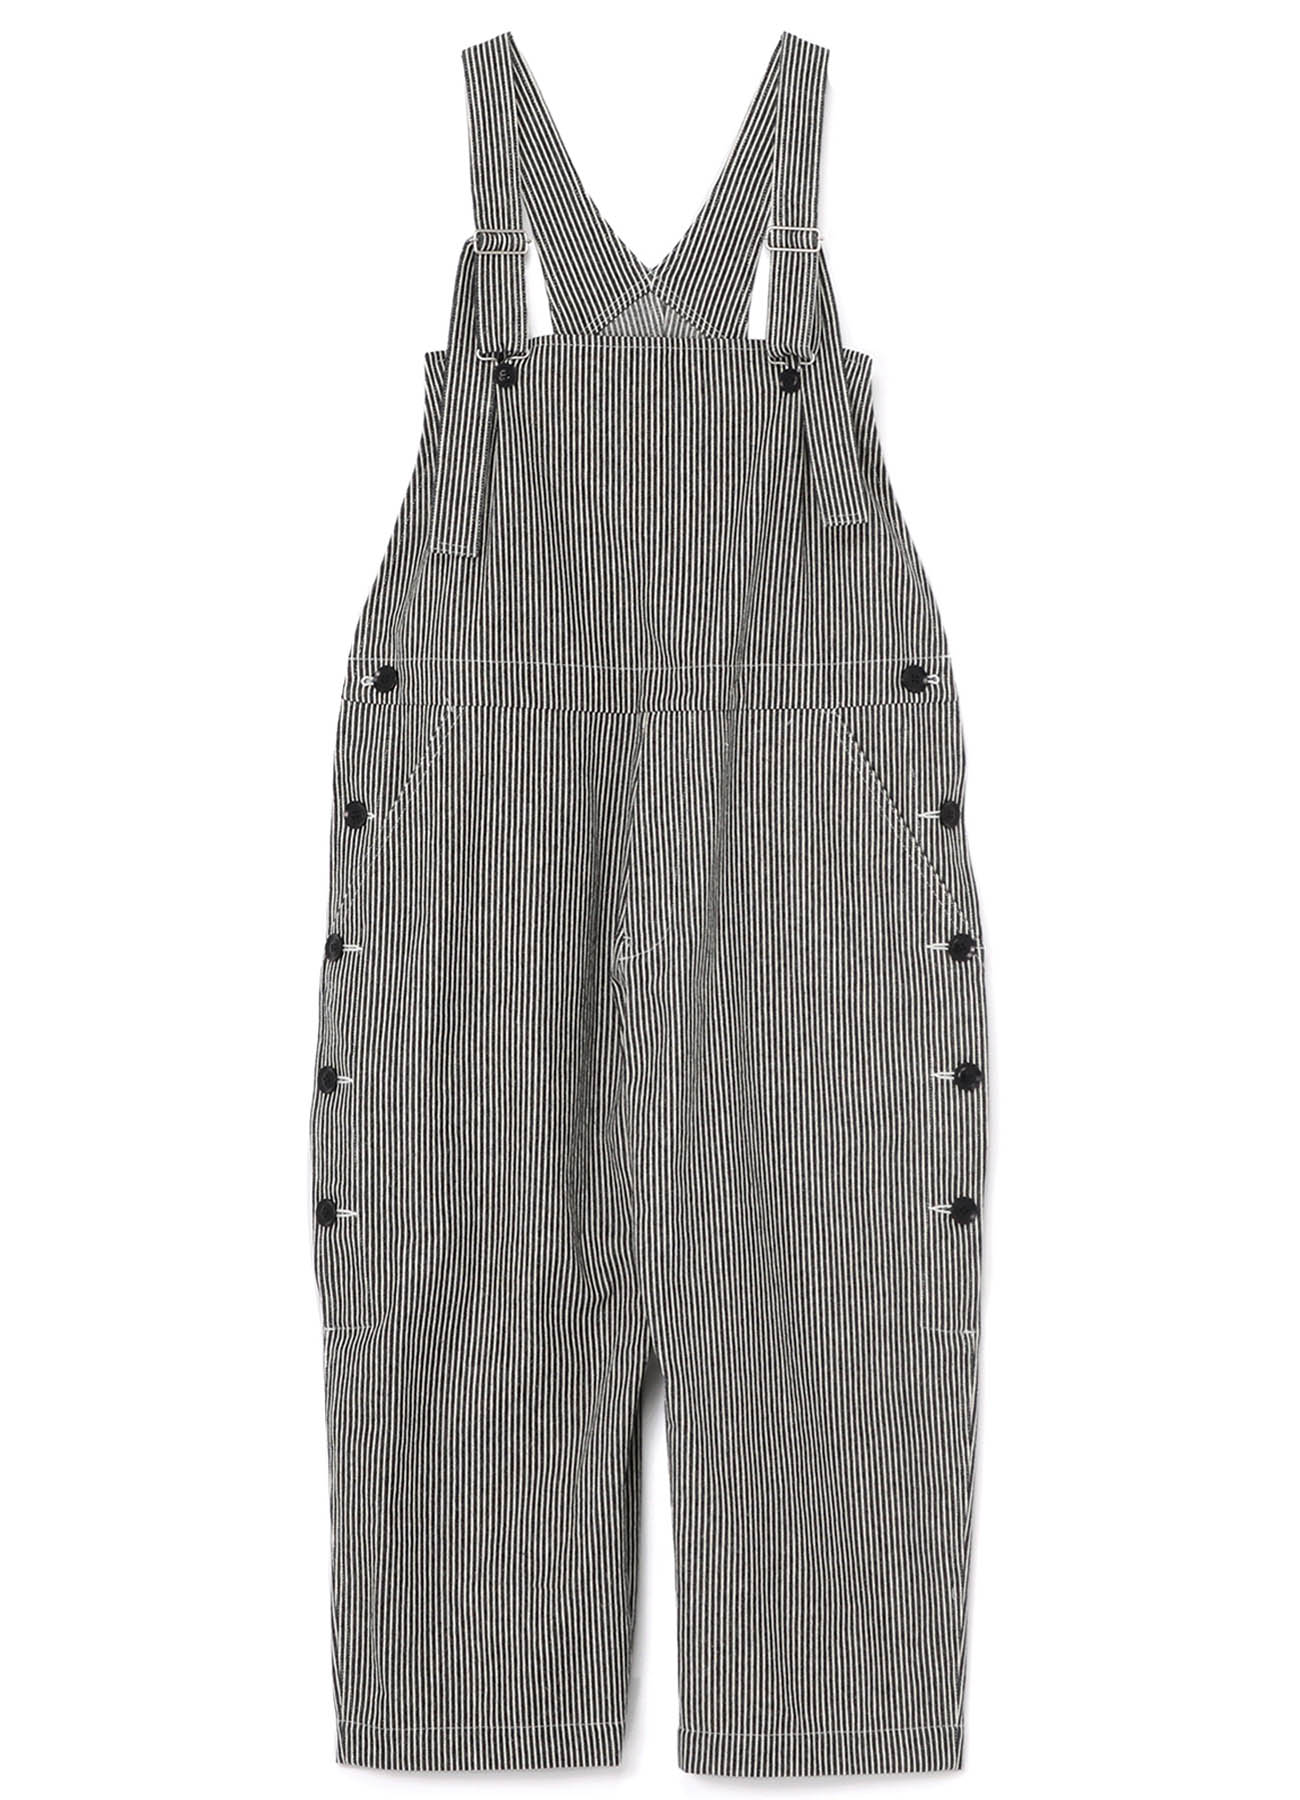 HICKORY BOLD OVERALLS